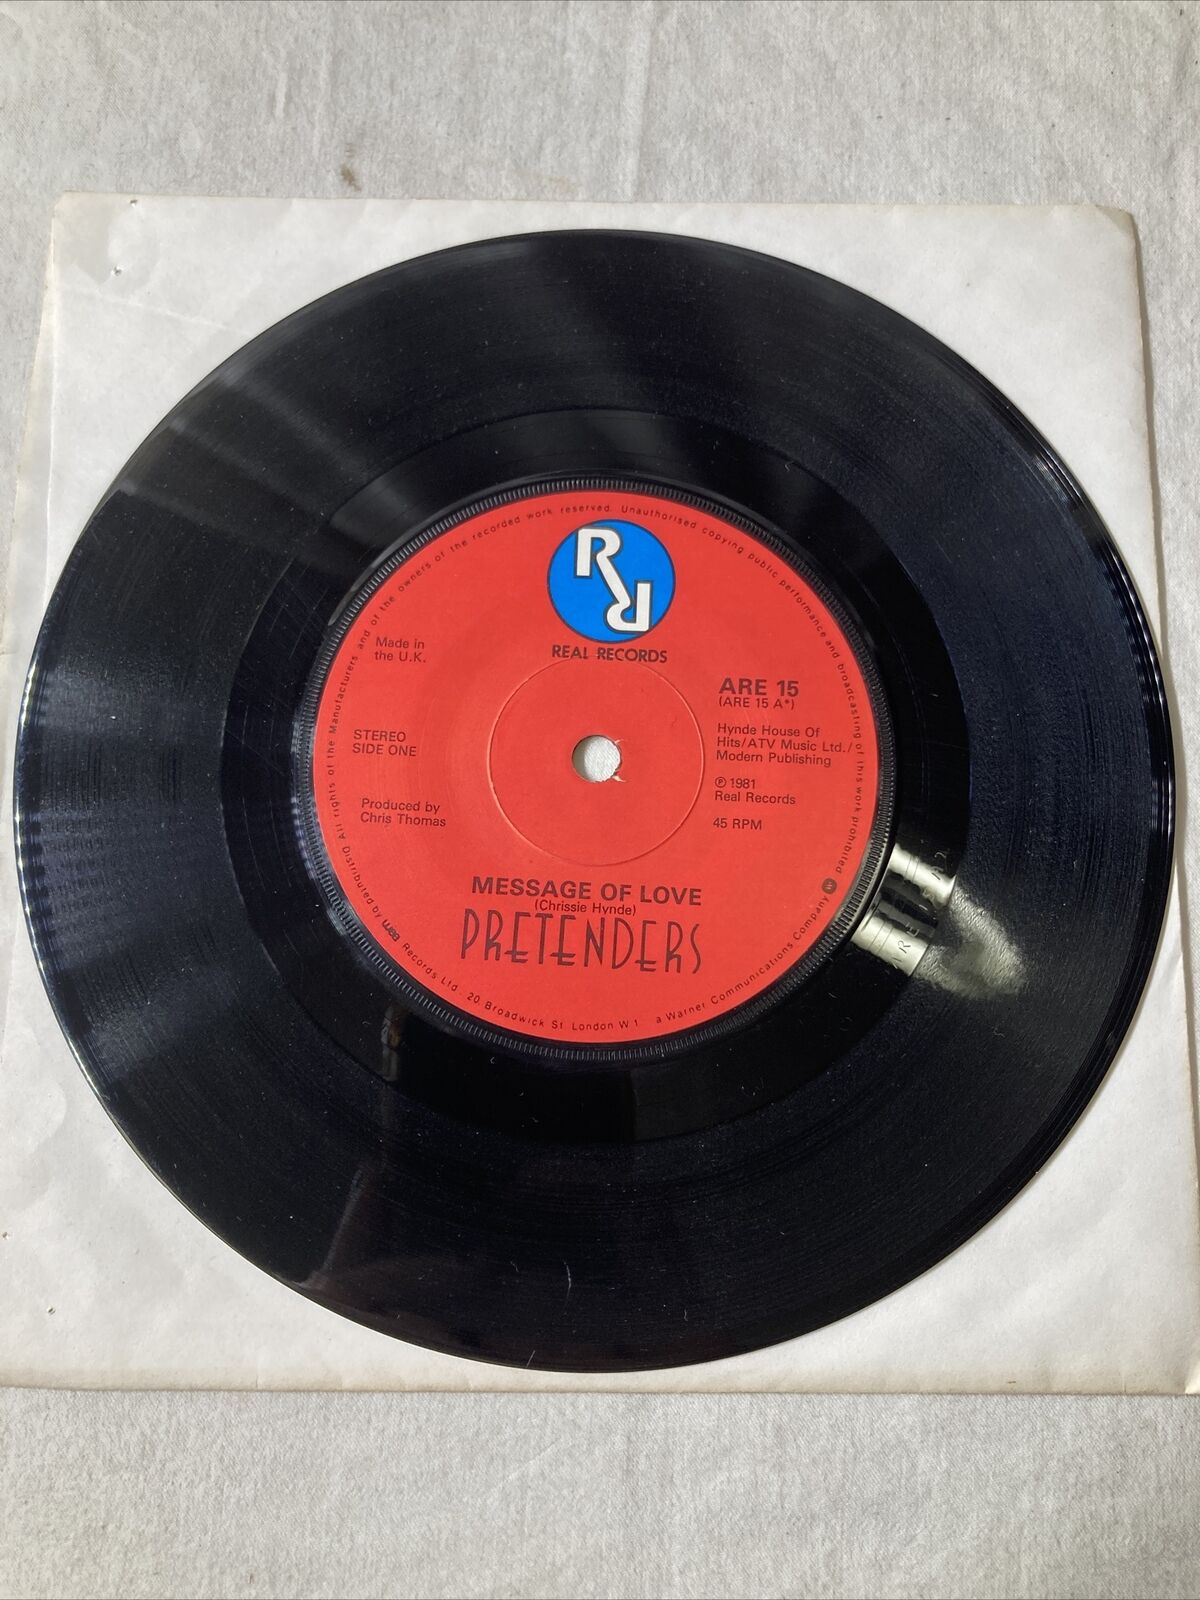 Pretenders Porcelain Message Of Love 45 RPM Record 1981 Real